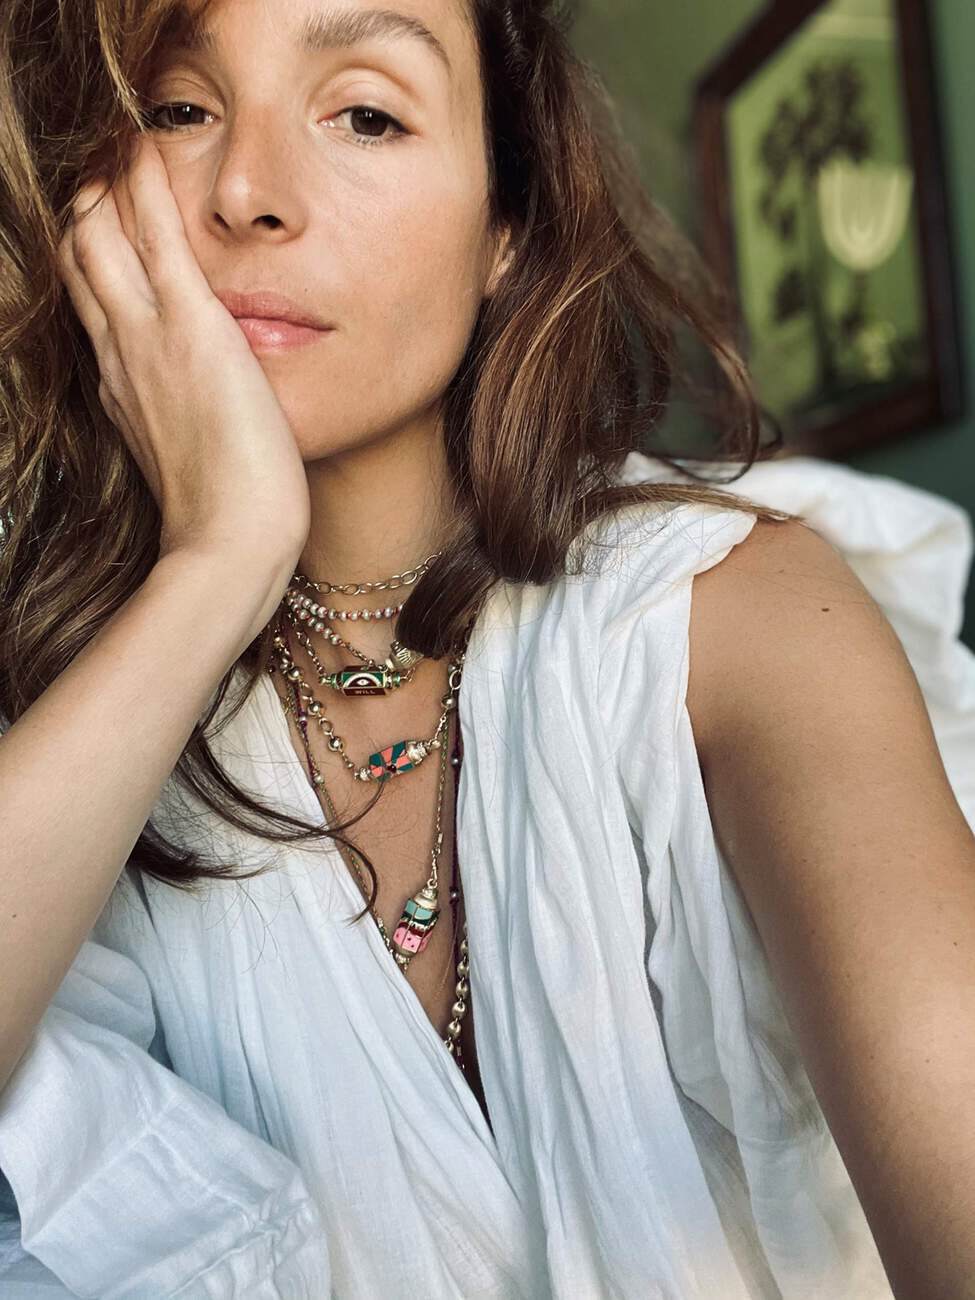 Jewelry market disruptors, former Elle fashion editor, launches her brand